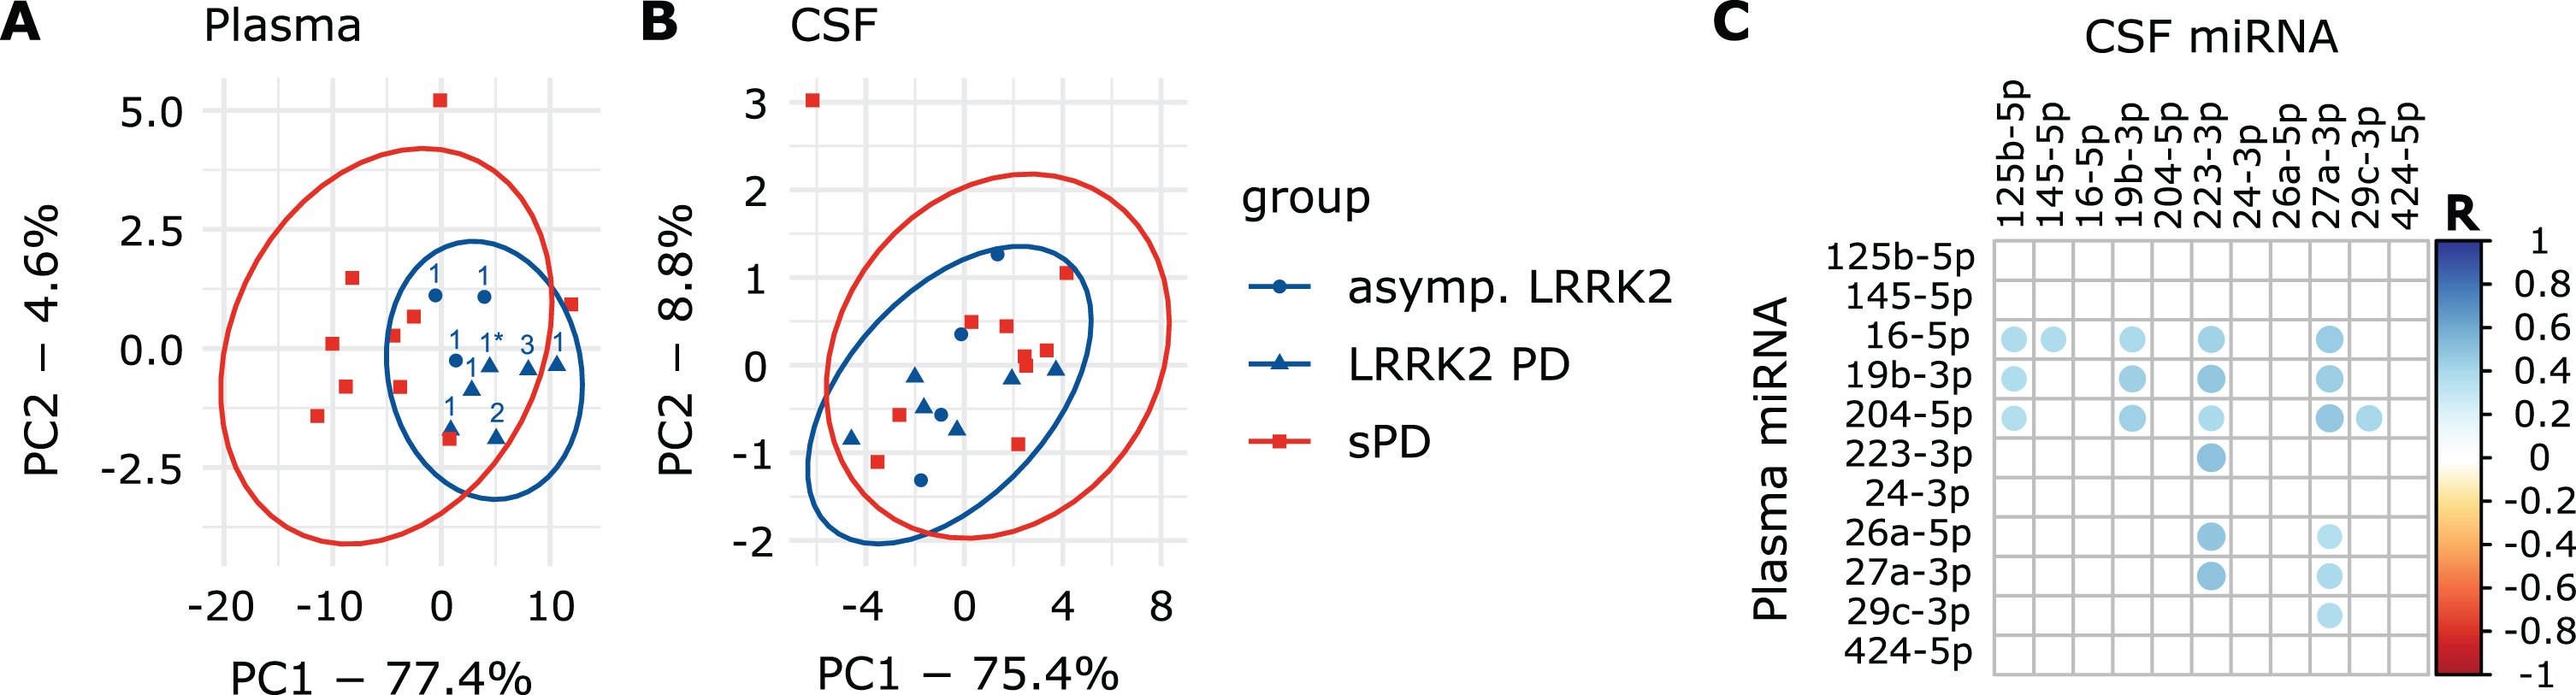 PCA graphs and correlation of plasma and CSF data. A) PCA graph from plasma and B) CSF Ct values. Ellipses indicate 95% confidence interval. Numbers indicate LRRK2 mutation (1: G2019S, 1*: G2019S + G1819, 2: R1441C, 3: I2020T). In the plasma PCA graph, group ellipses overlap while the blue LRRK2MC ellipse trends to only include individuals of the LRRK2MC group. Based on PCA, the LRRK2MC group could be interpreted as a subpopulation of all PD patients. C) Correlation matrix presenting statistically significant (p < 0.05) correlations between Ctplasma and CtCSF values of the eleven miRNAs included in the CSF dataset.